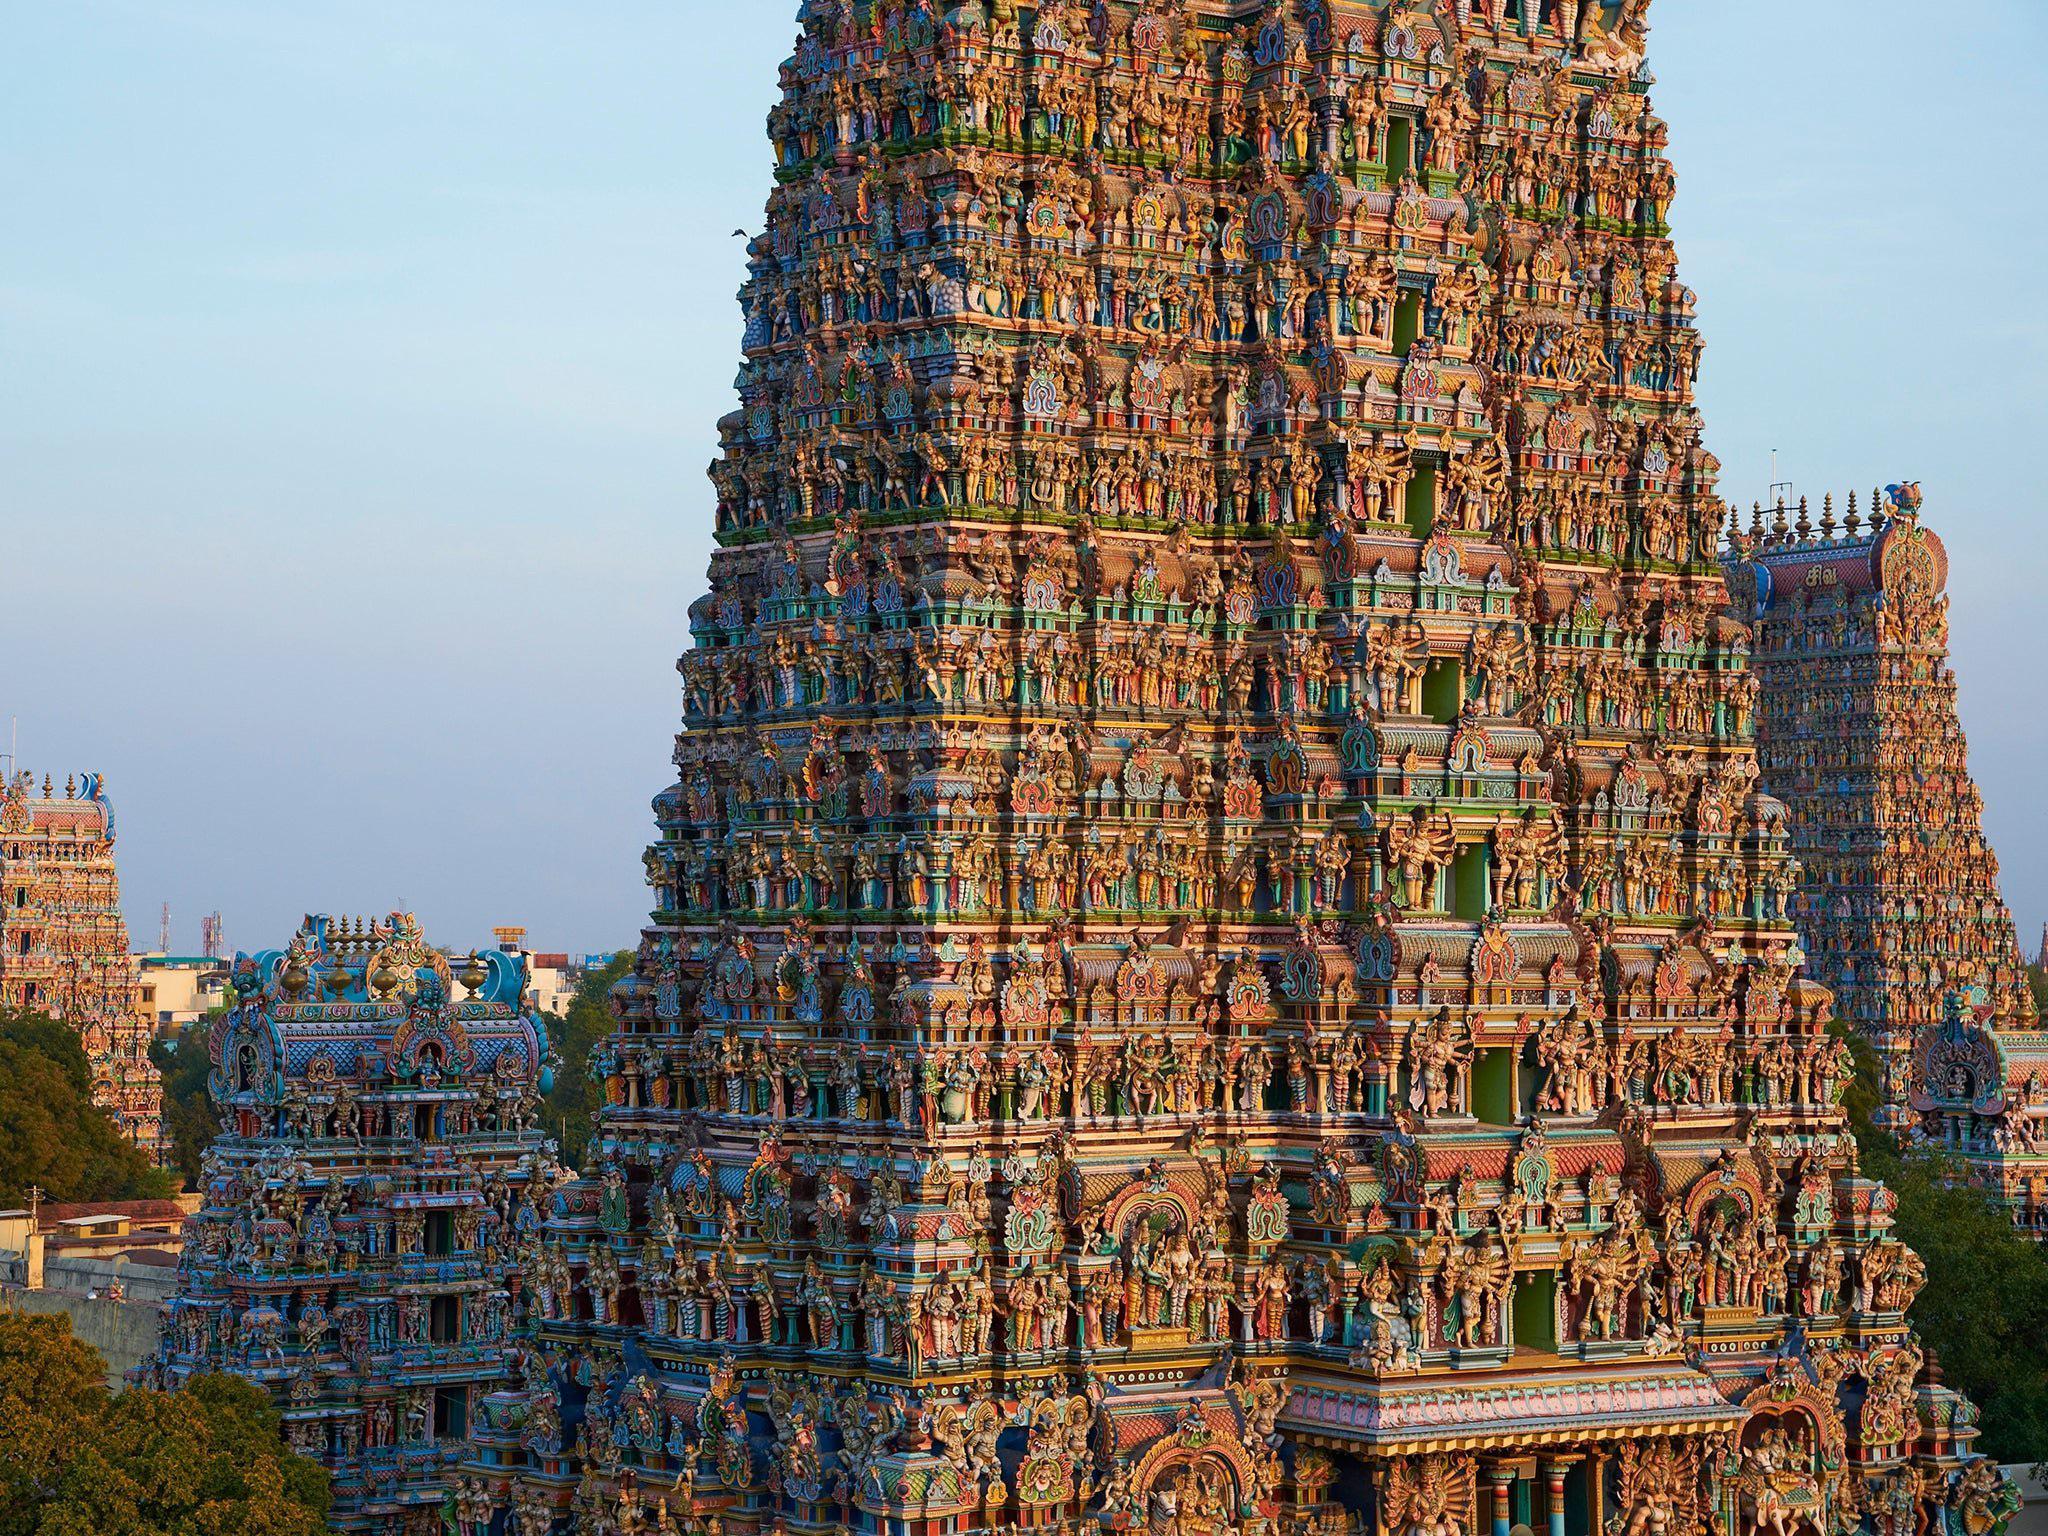 The Beautiful Meenakshi Amman Temple This incredible structure is more than 500 years old